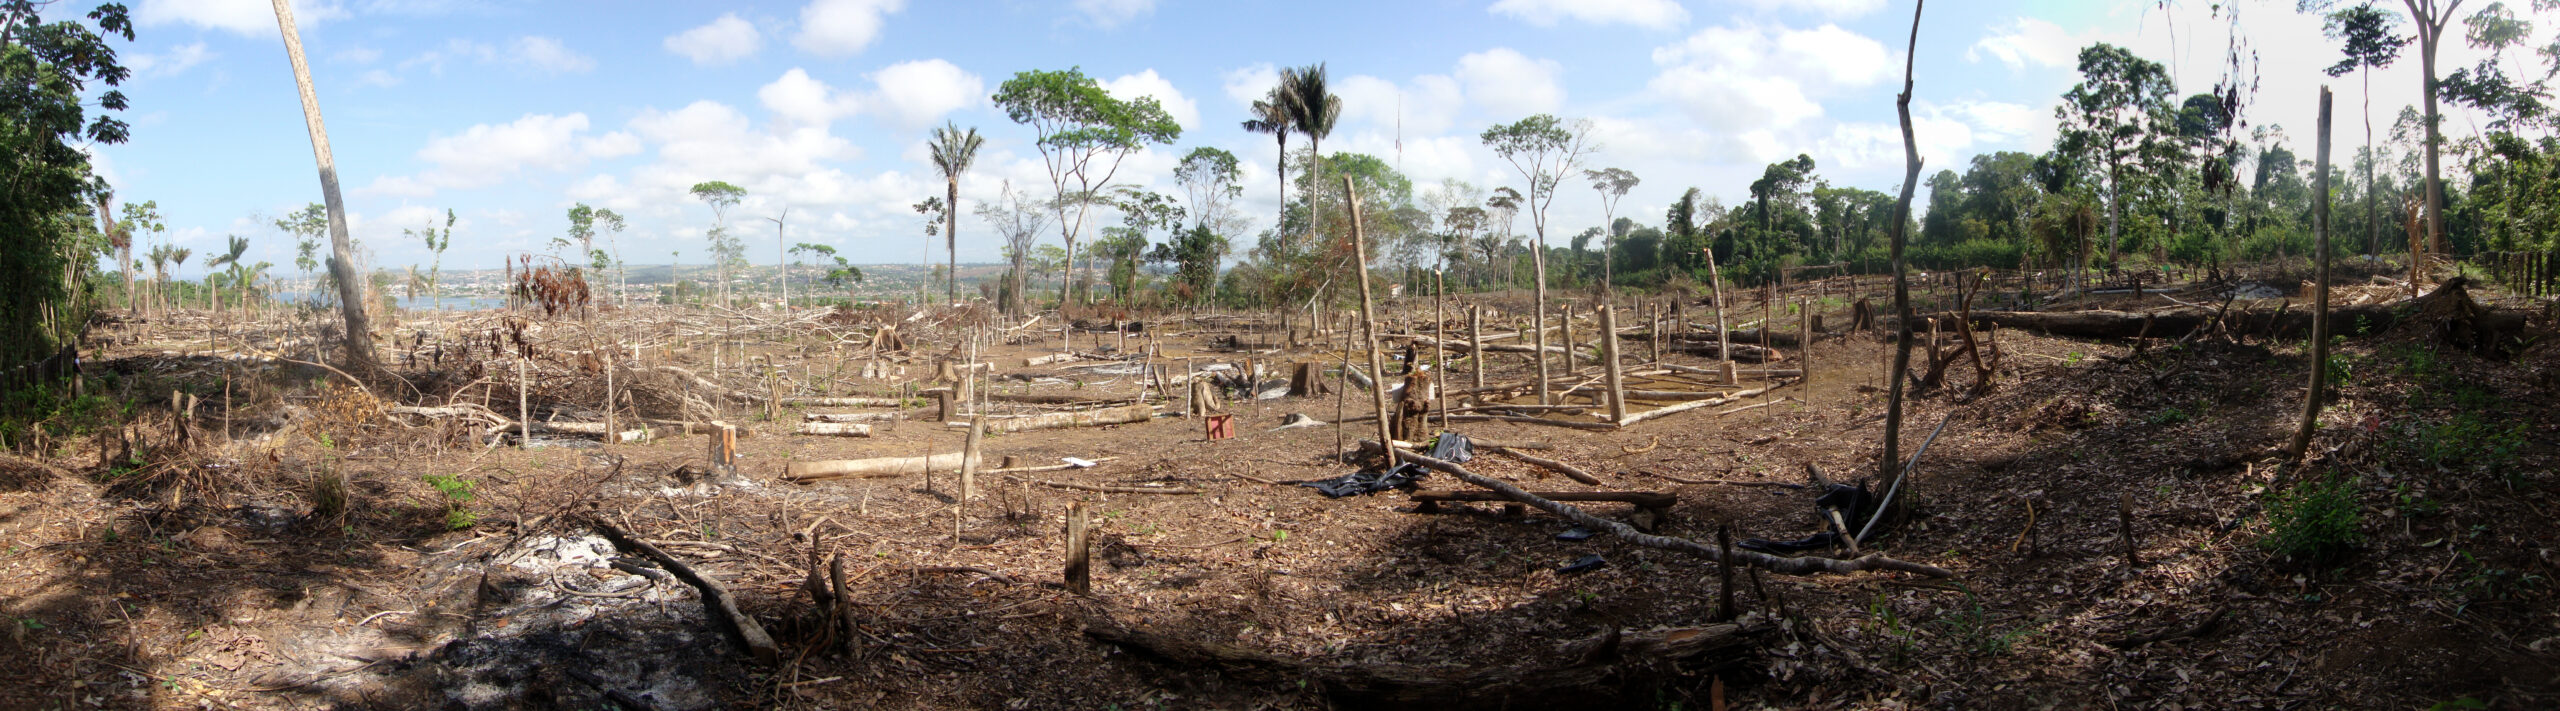 Illegal deforestation of vegetation native to the Brazilian Amazon forest